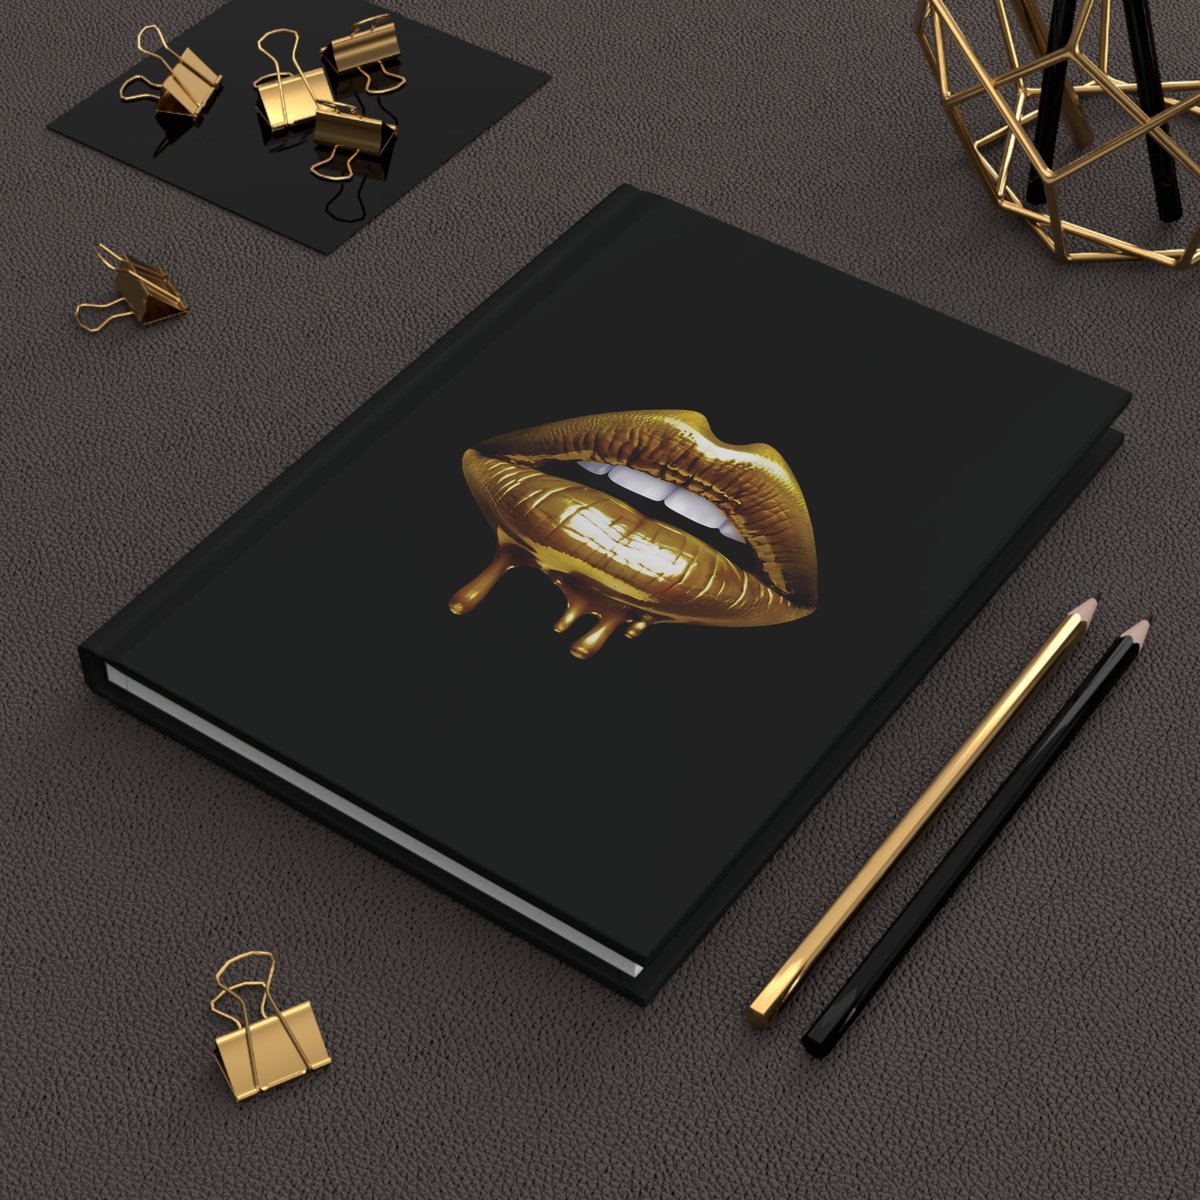 PLUSH BOY LIQUID GLITTER WILD HARDCOVER JOURNAL 👇 Make your everyday journaling more personal, private, and stylish with this matte hardcover journal. Available in 5.75'x8', with 150 lined pages, thes... postdolphin.com/t/LKWZZ